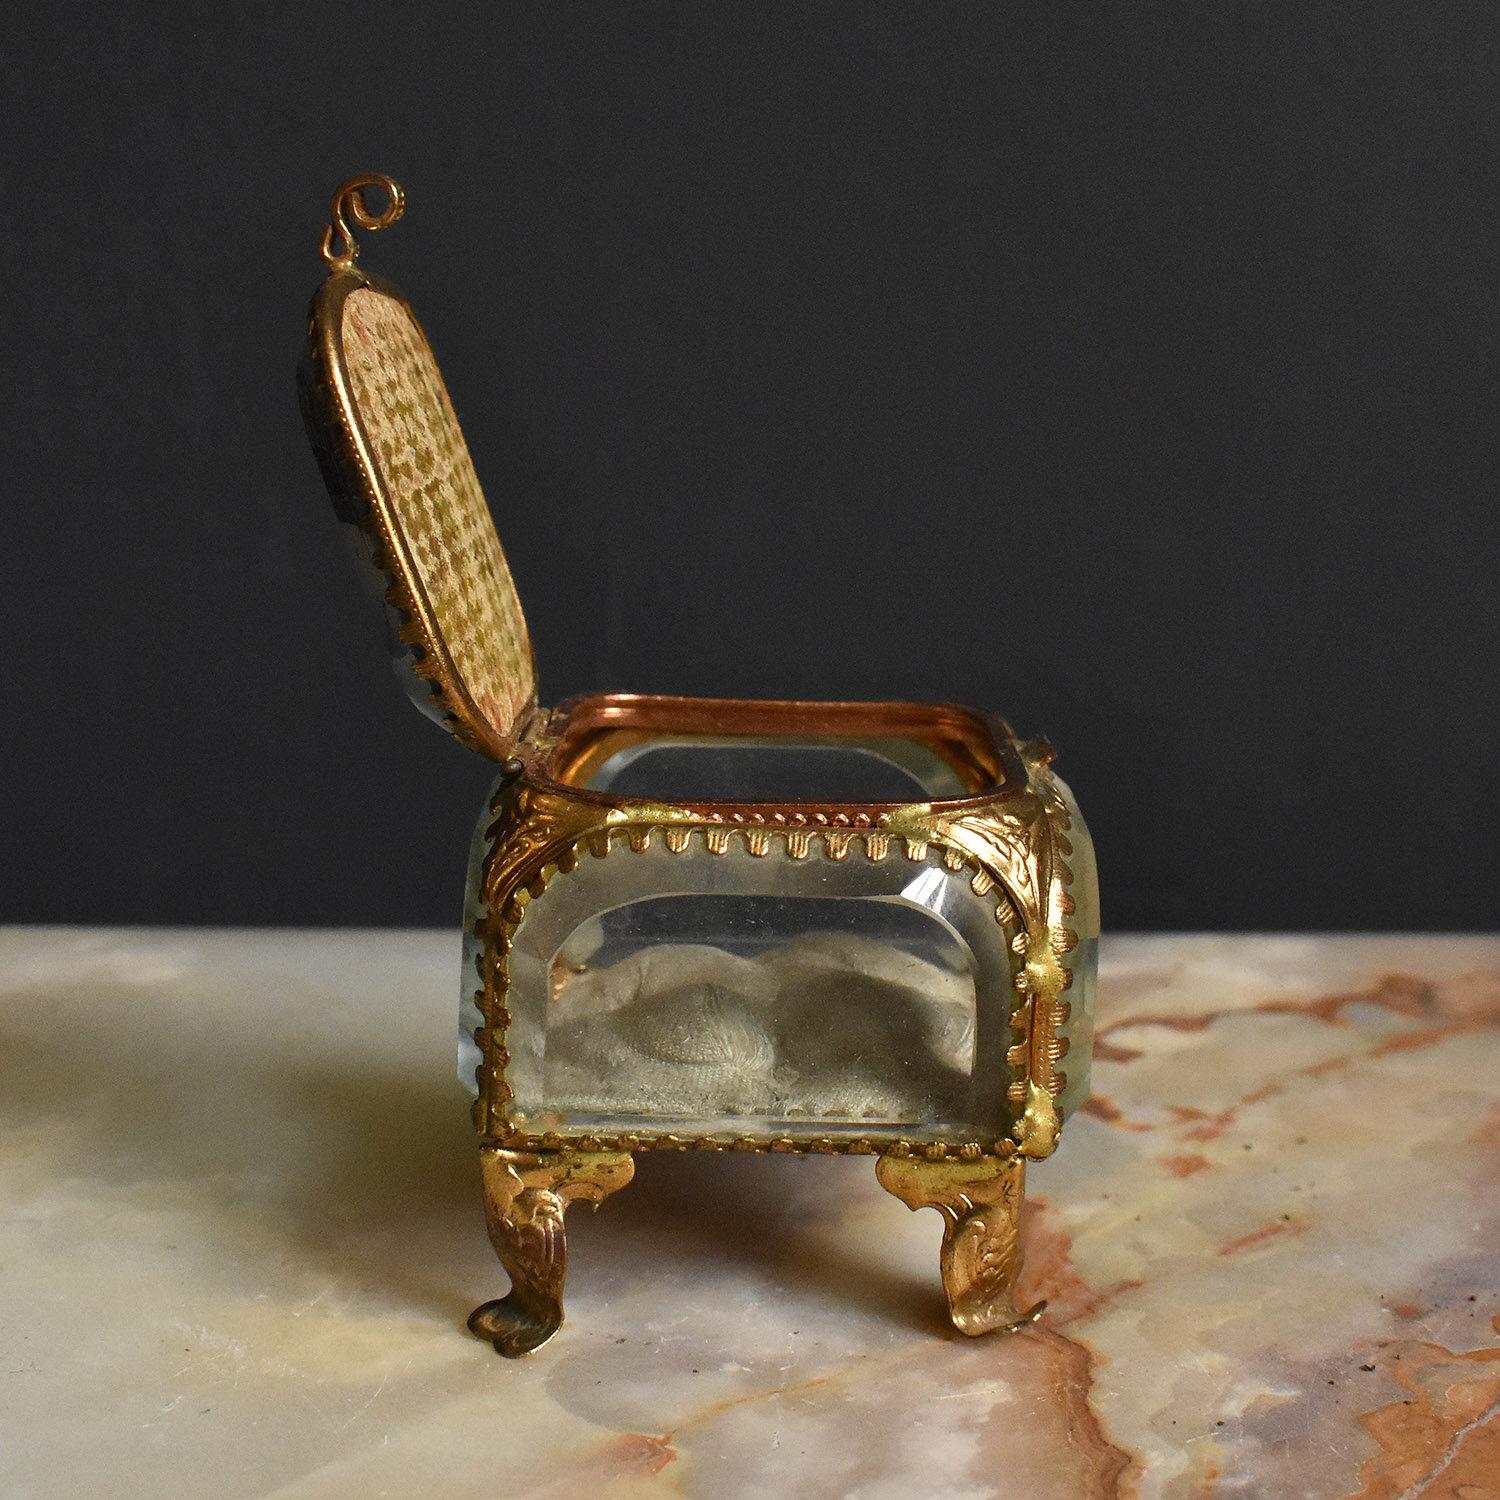 Antique French Gilt Brass and Cut Glass Souvenir Jewellery Casket, 19th Century For Sale 7